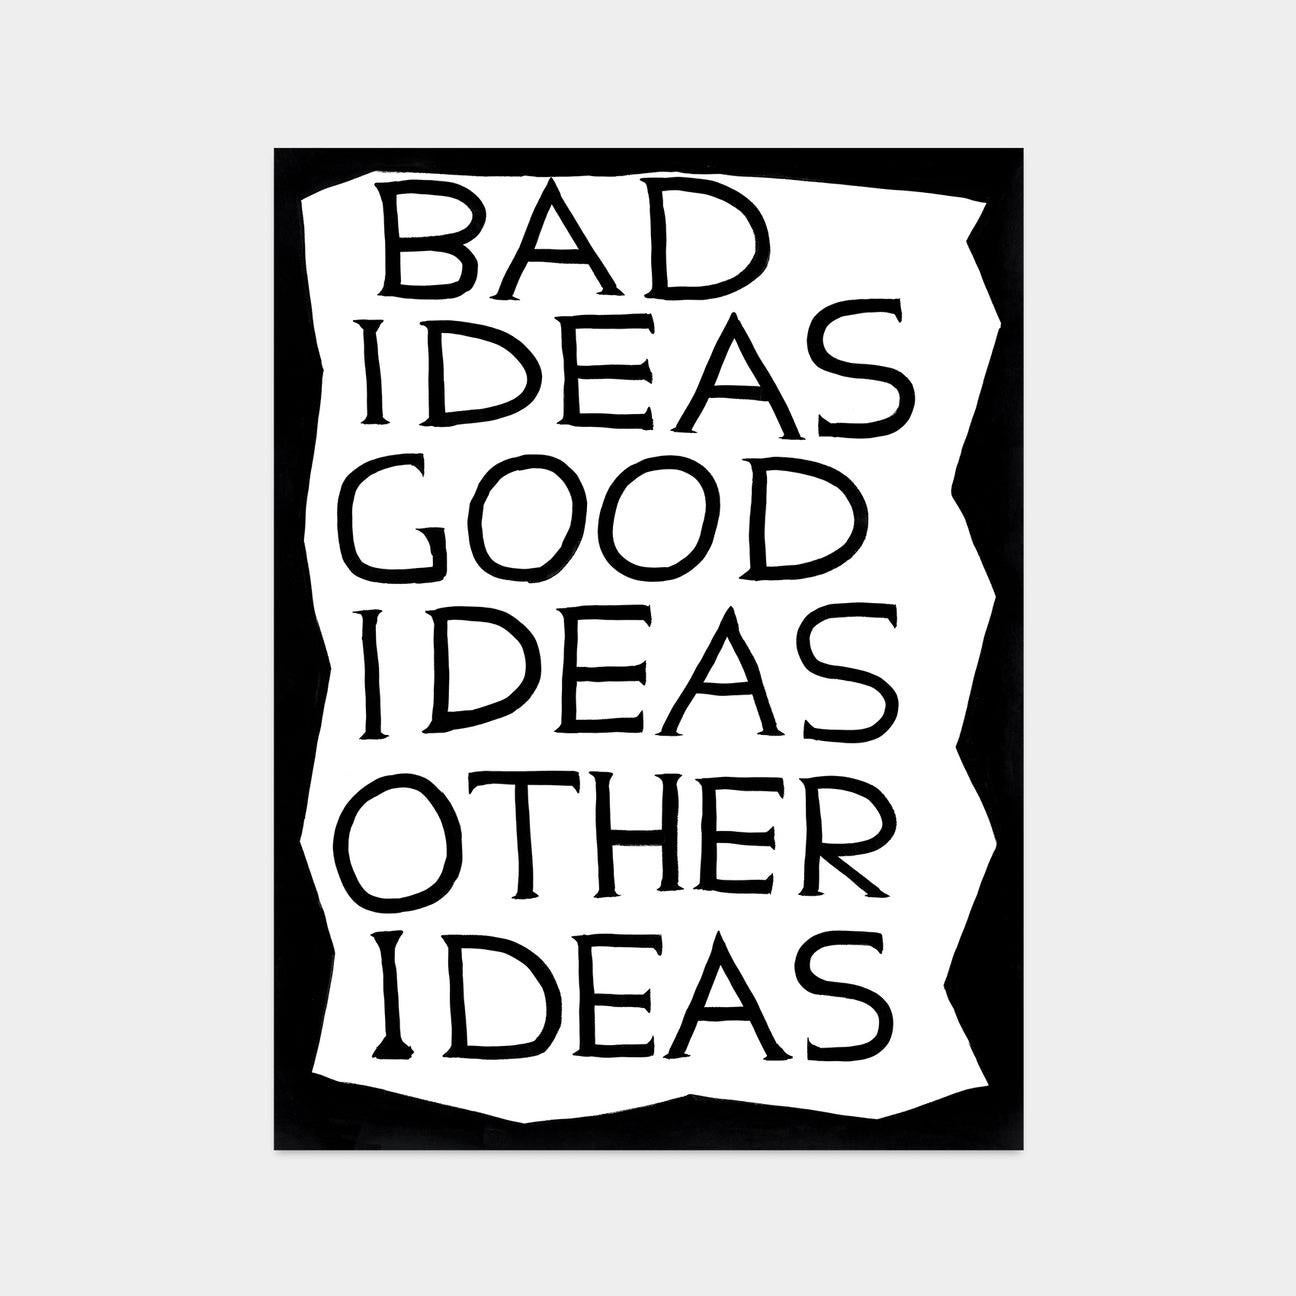 David Shrigley, Bad Ideas Good Ideas, 2022

Off-set lithograph
Open edition, unframed 
50 x 70 cm (19.68 x 27.55 in) 
Printed on 200g Munken Lynx paper Narayana Press in Denmark

This print is based on the original acrylic work on paper by David